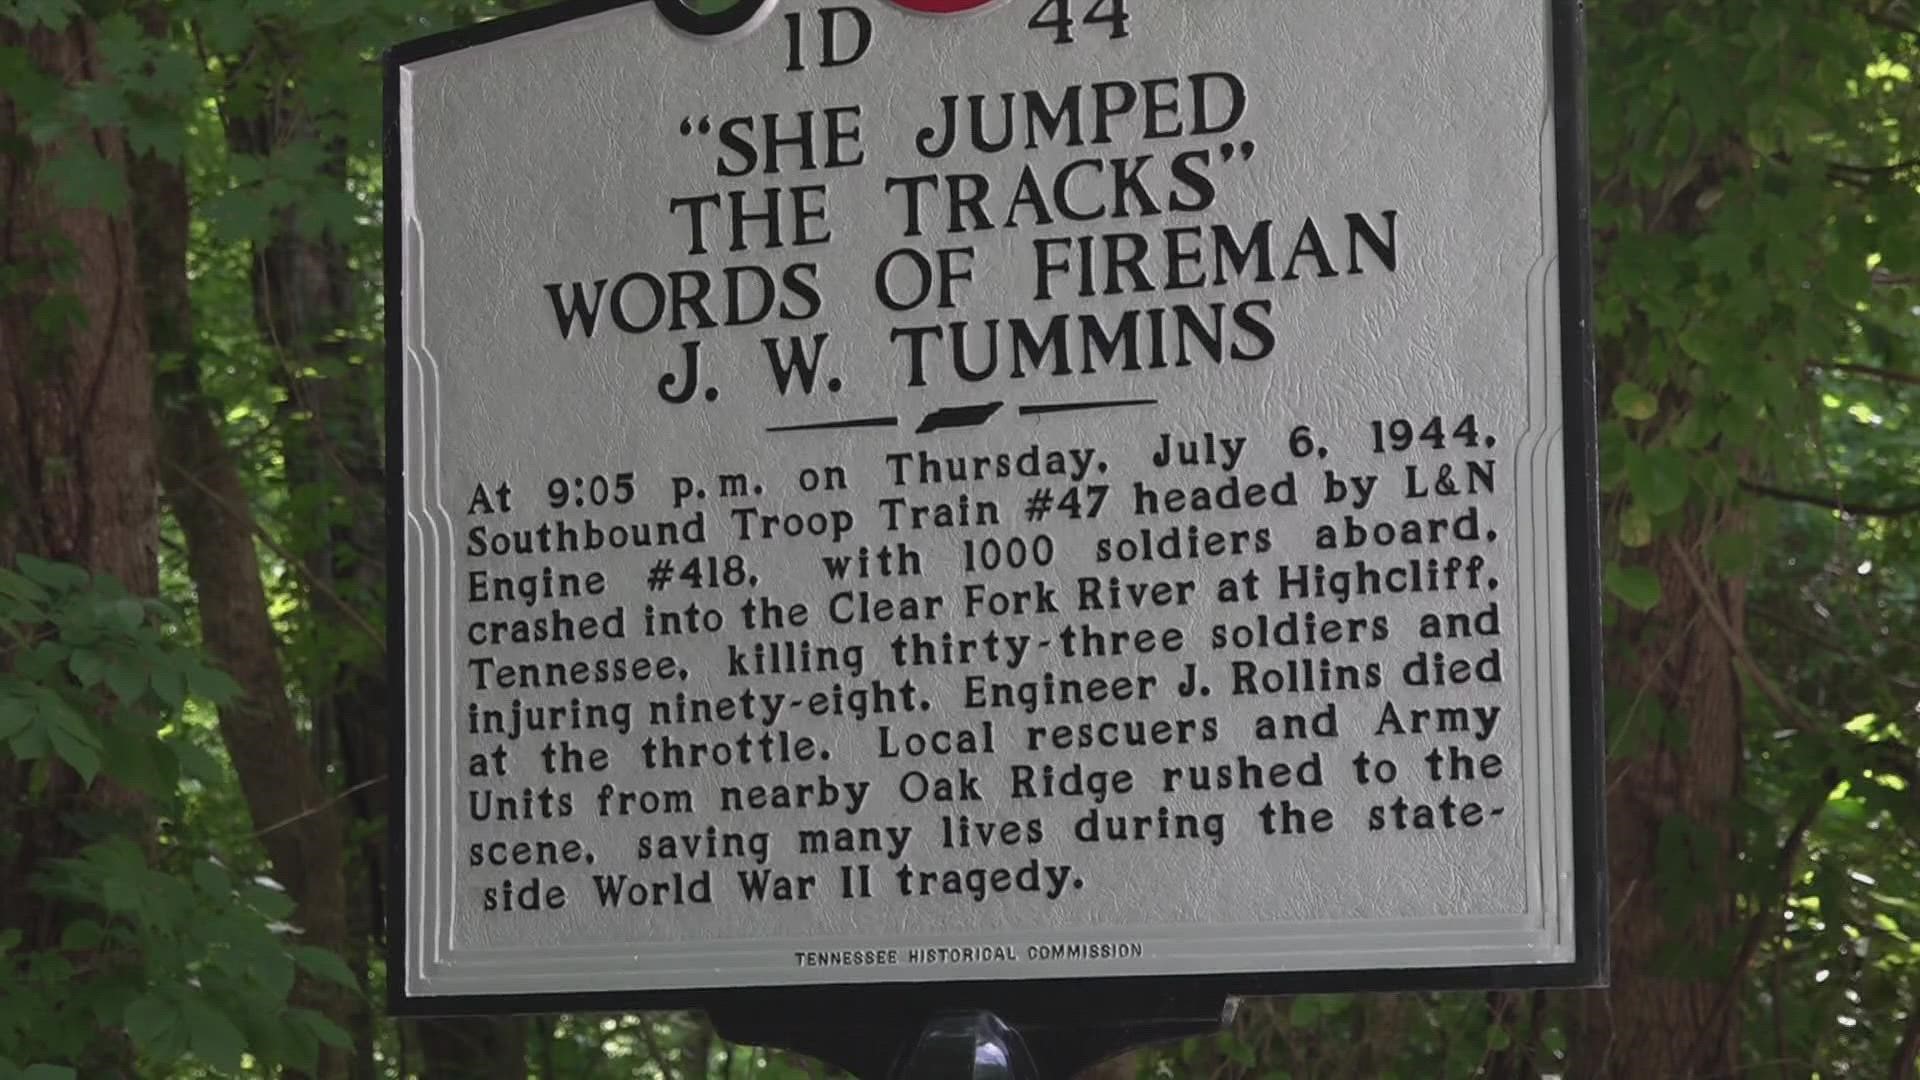 The Tennessee Historical Commission dedicated the new marker exactly 78 years after the tragedy.